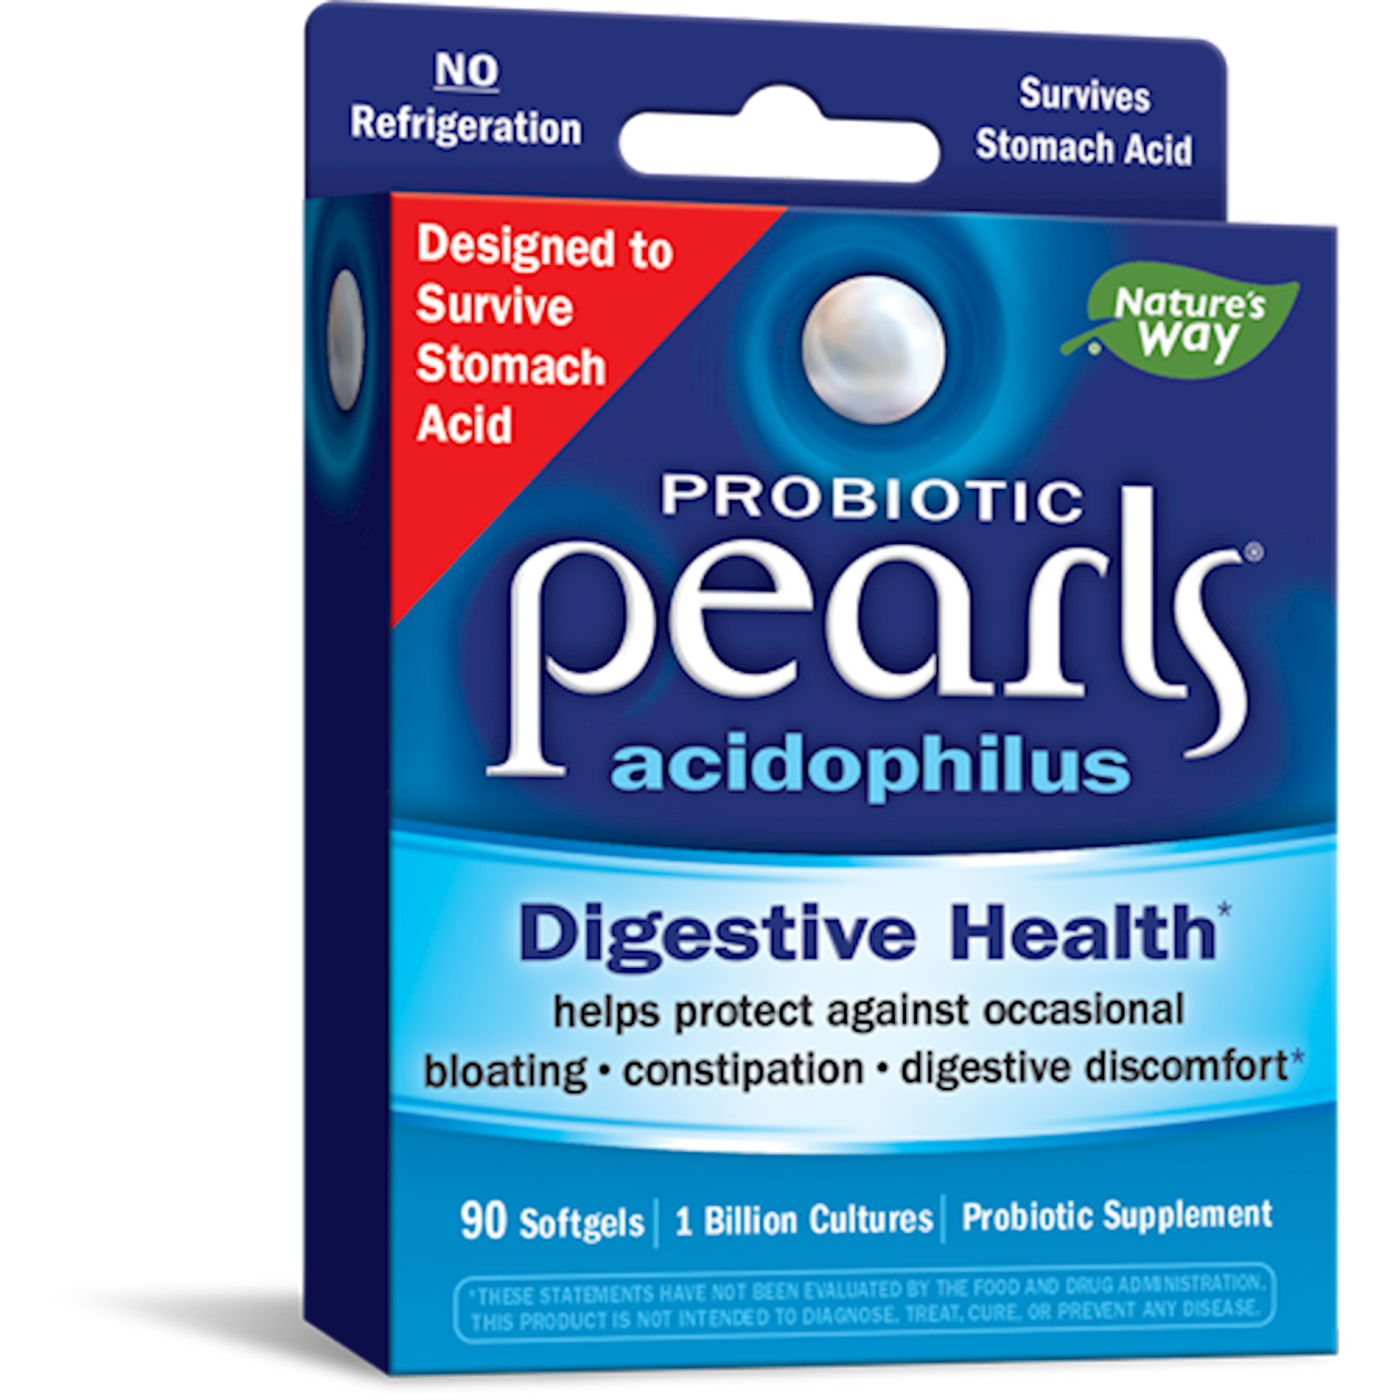 Acidophilus Pearls 90 caps Curated Wellness